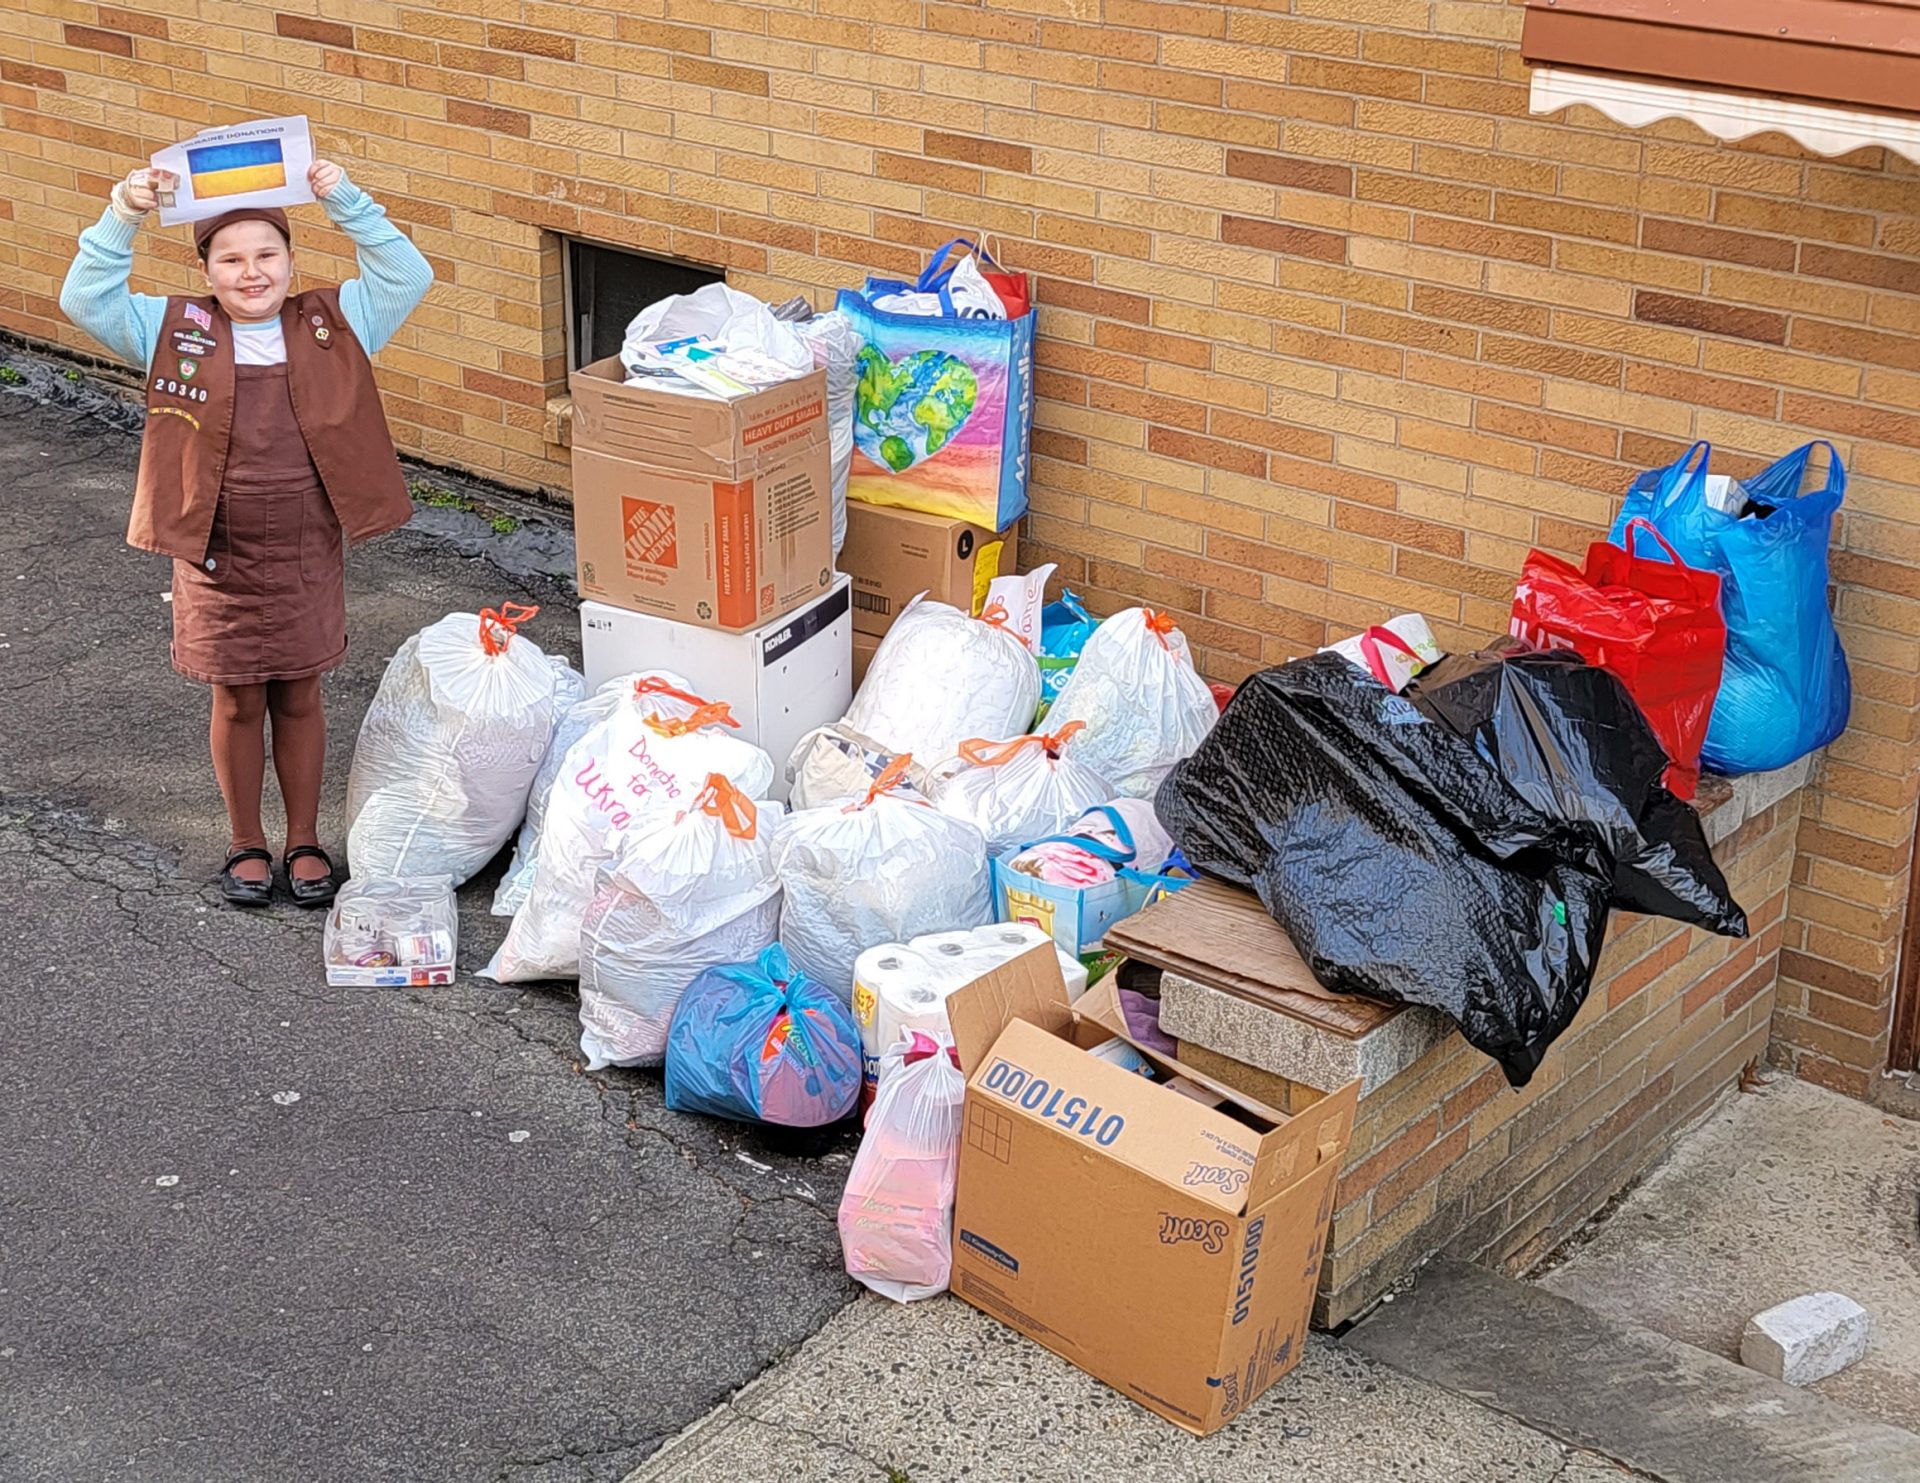 Brownie Girl Scout standing next to a large pile of donations 